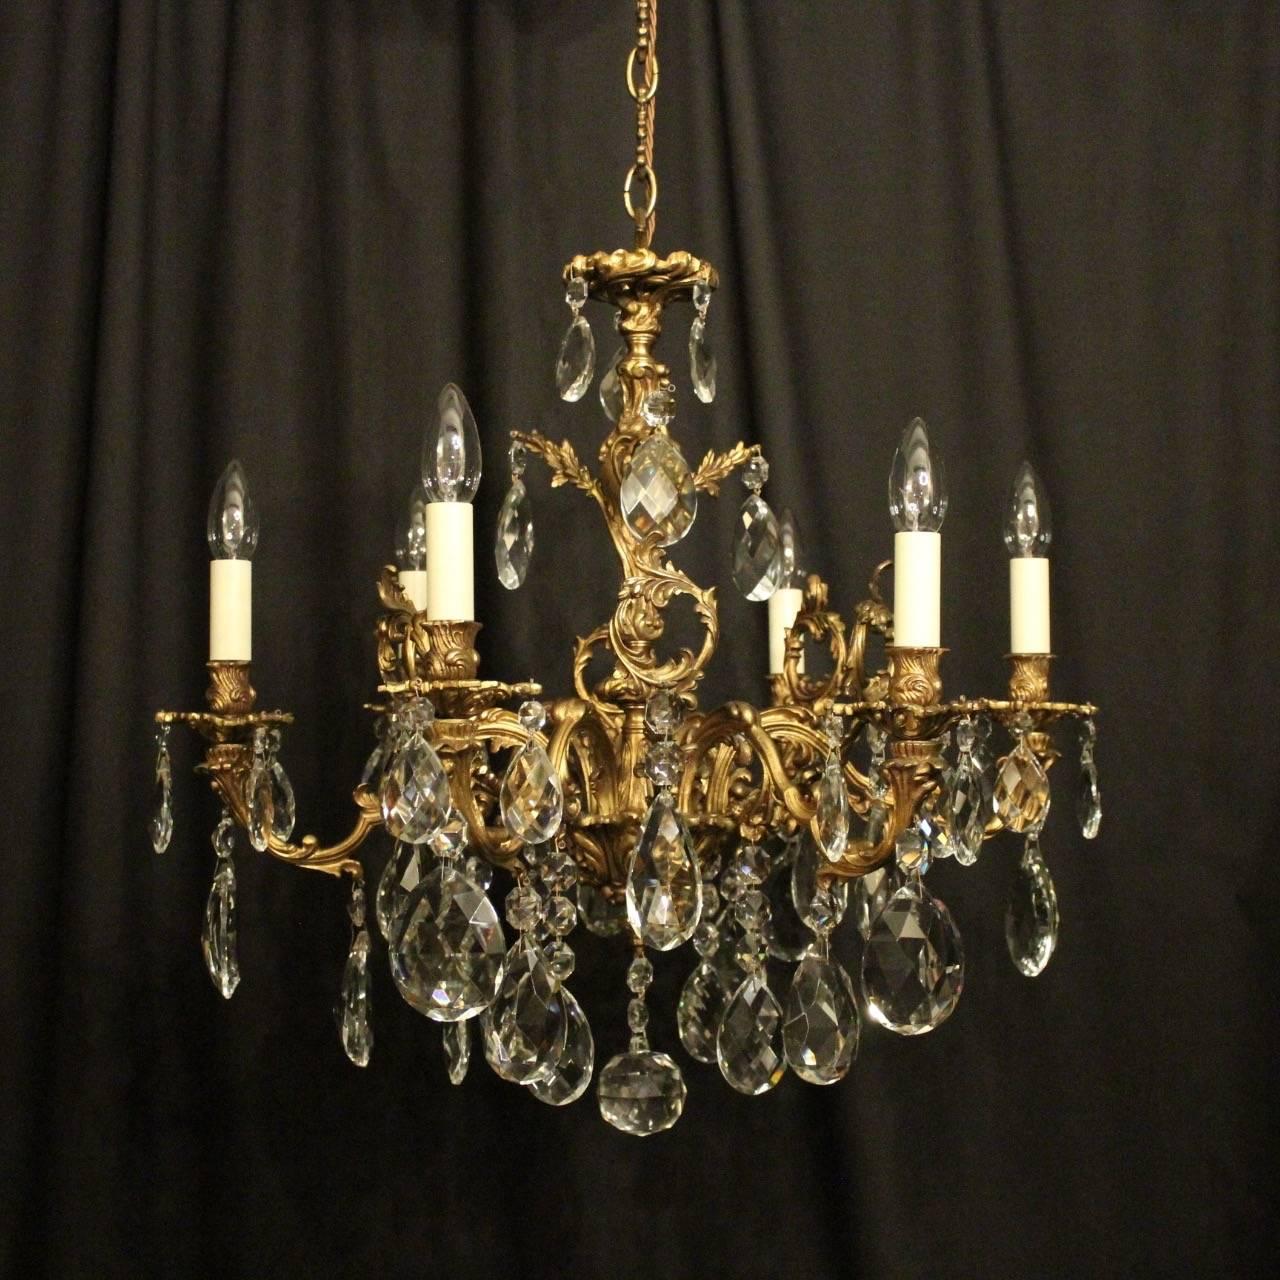 An Italian gilded cast bronze and crystal six-light antique chandelier, the leaf scrolling arms with leaf bobeche drip pans and bulbous candle sconces, issuing from a foliated central column with ornate scrolling leaf pierced outcrops, decorated